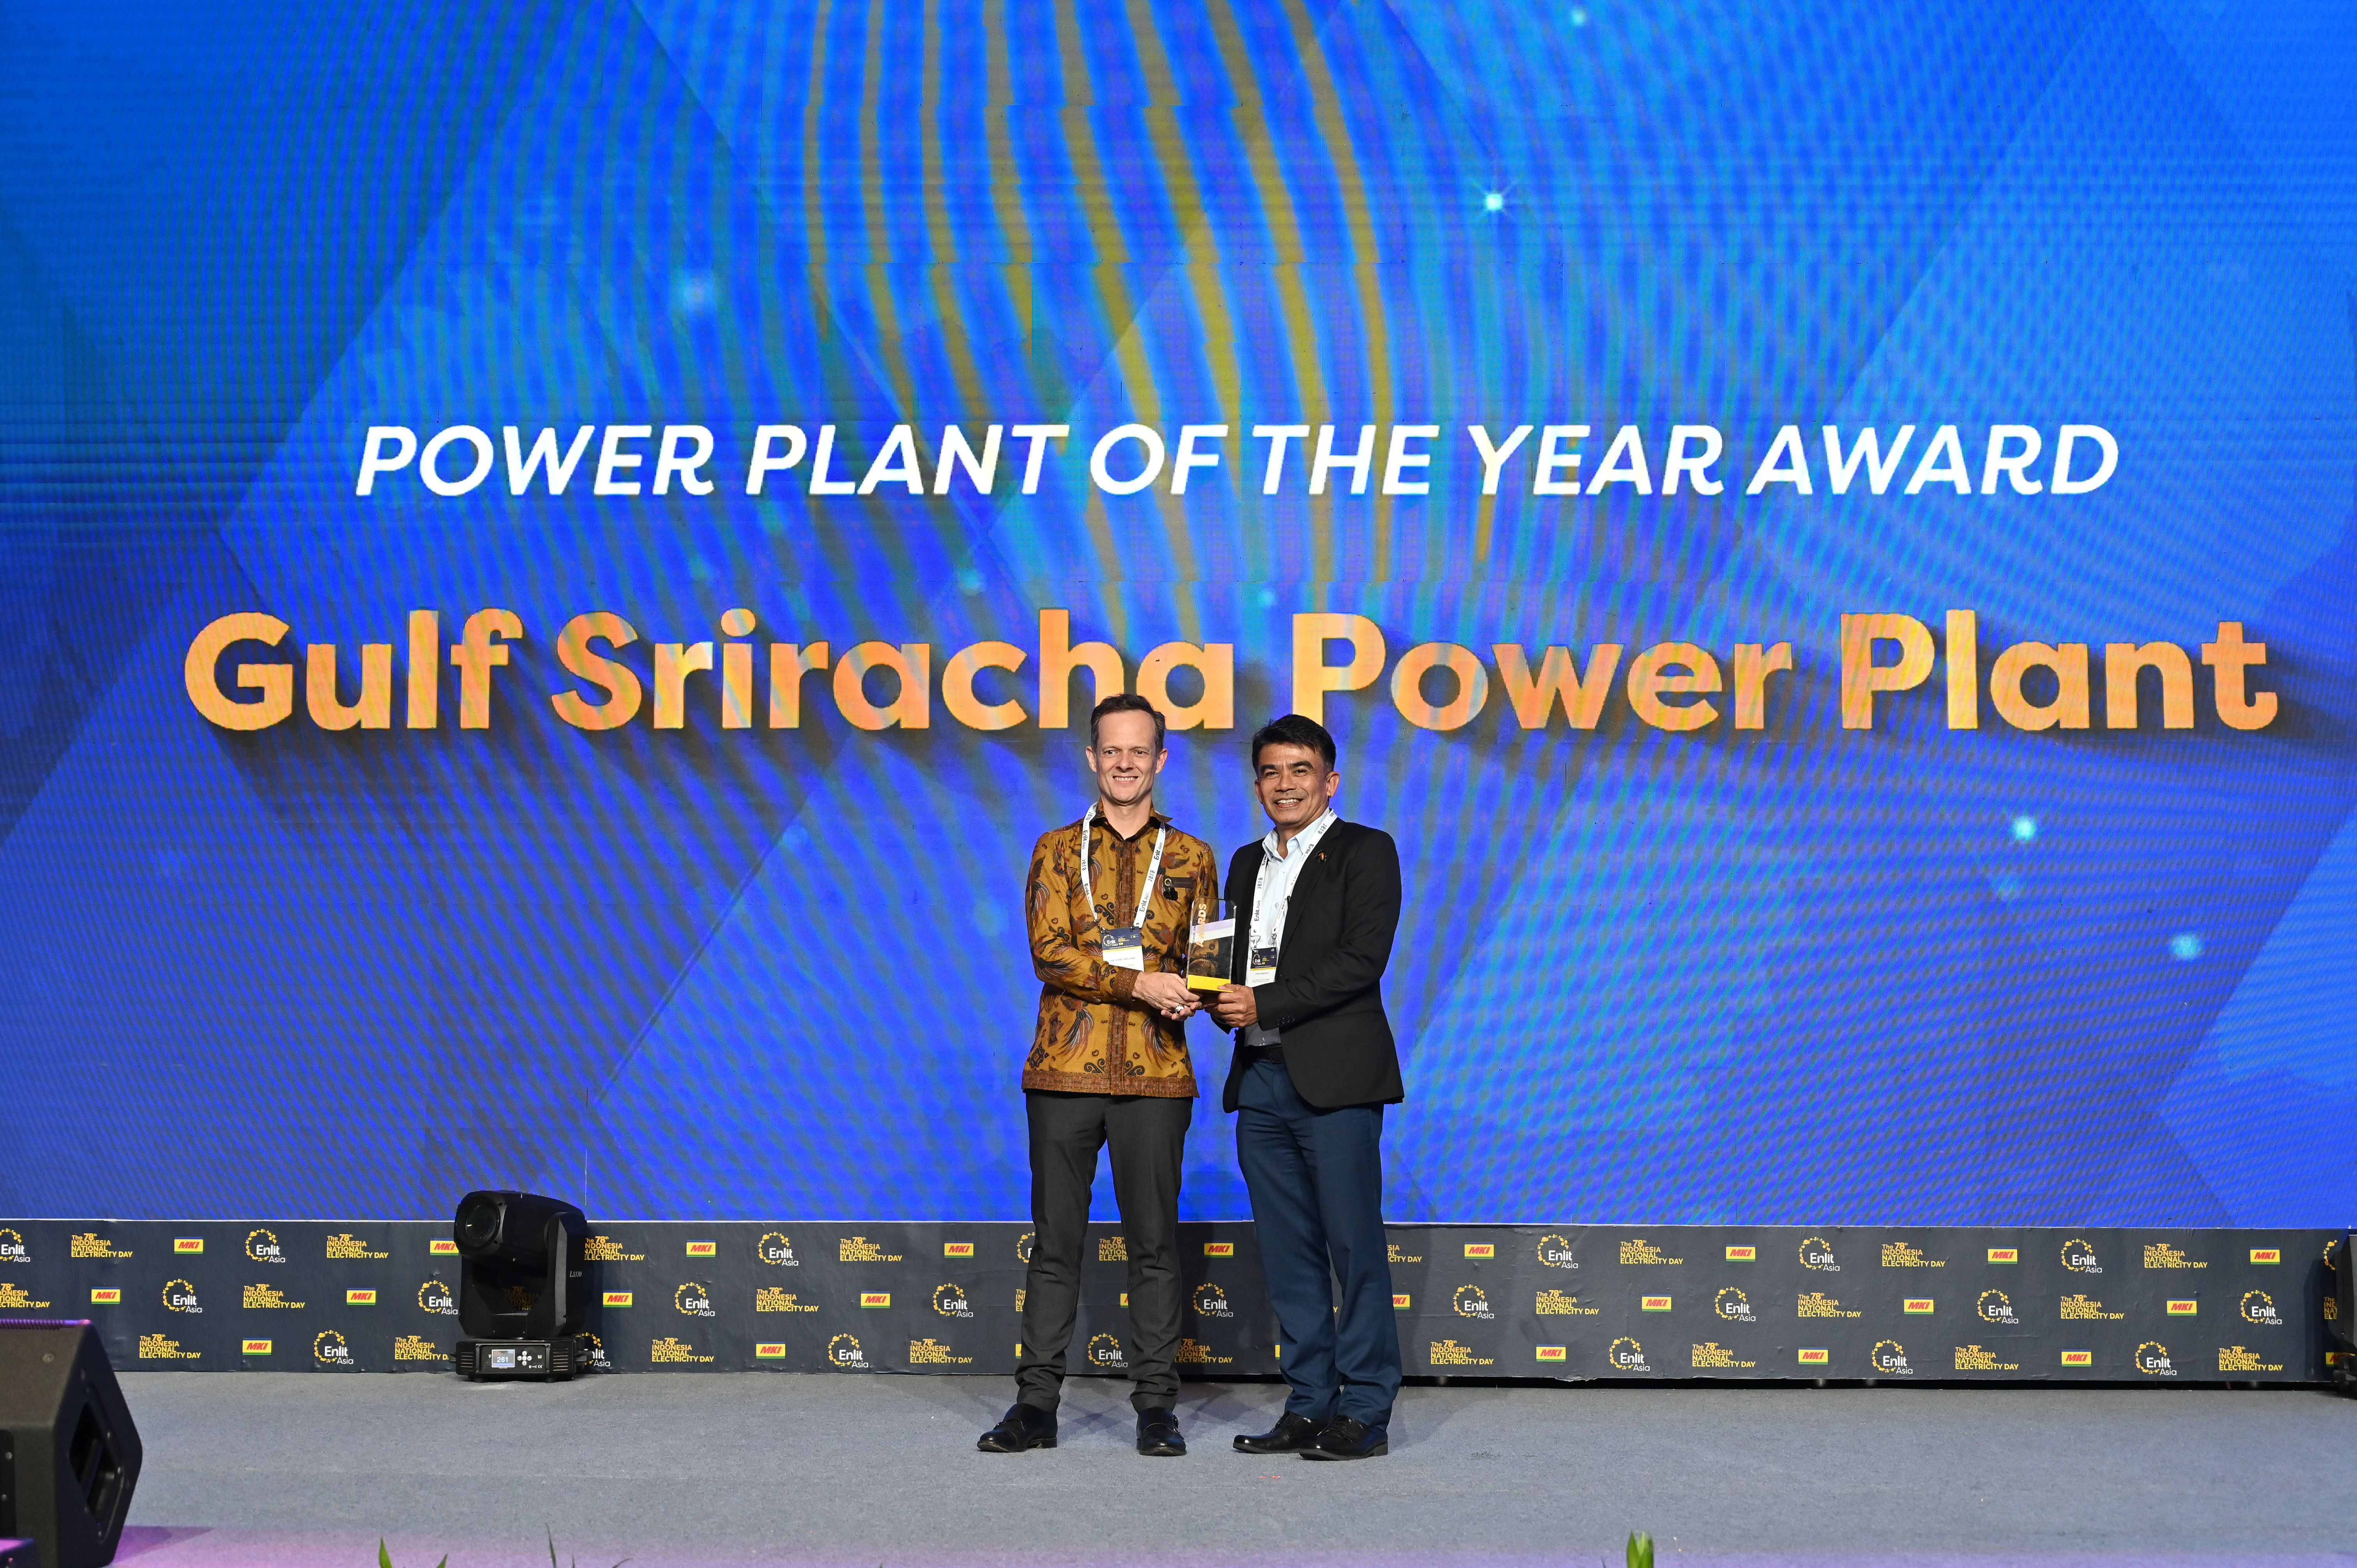 Power Plant of the Year